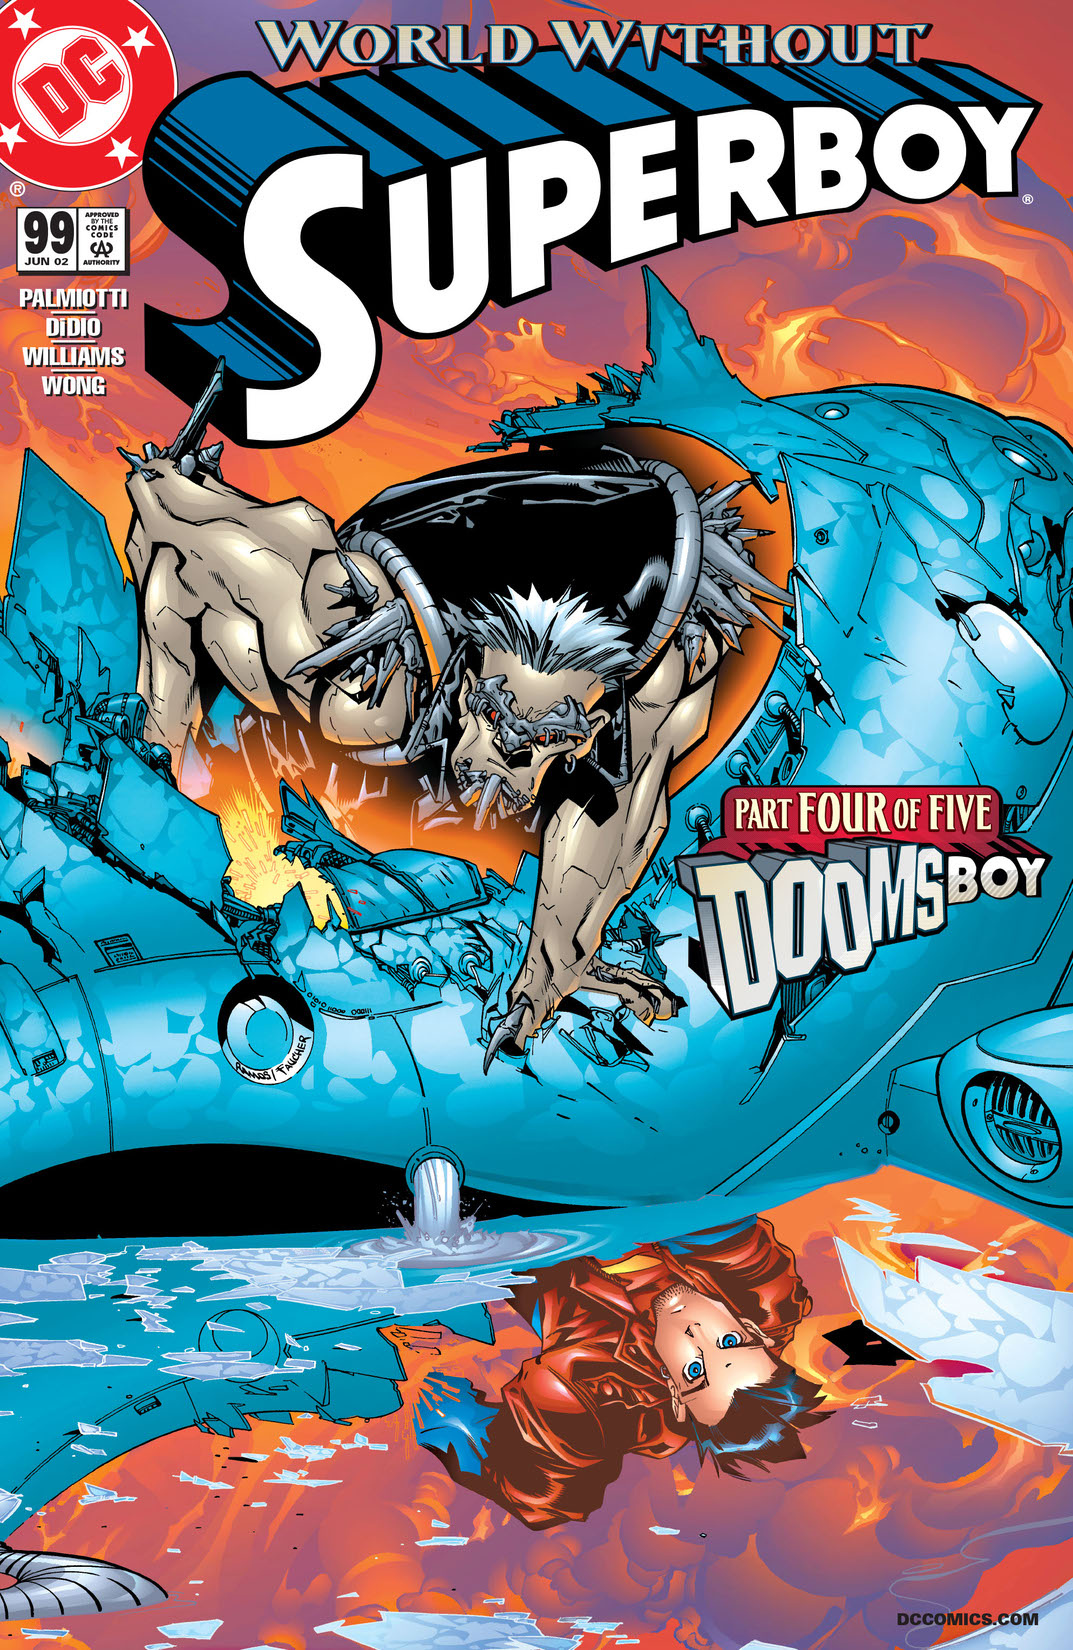 Superboy (1993-) #99 preview images